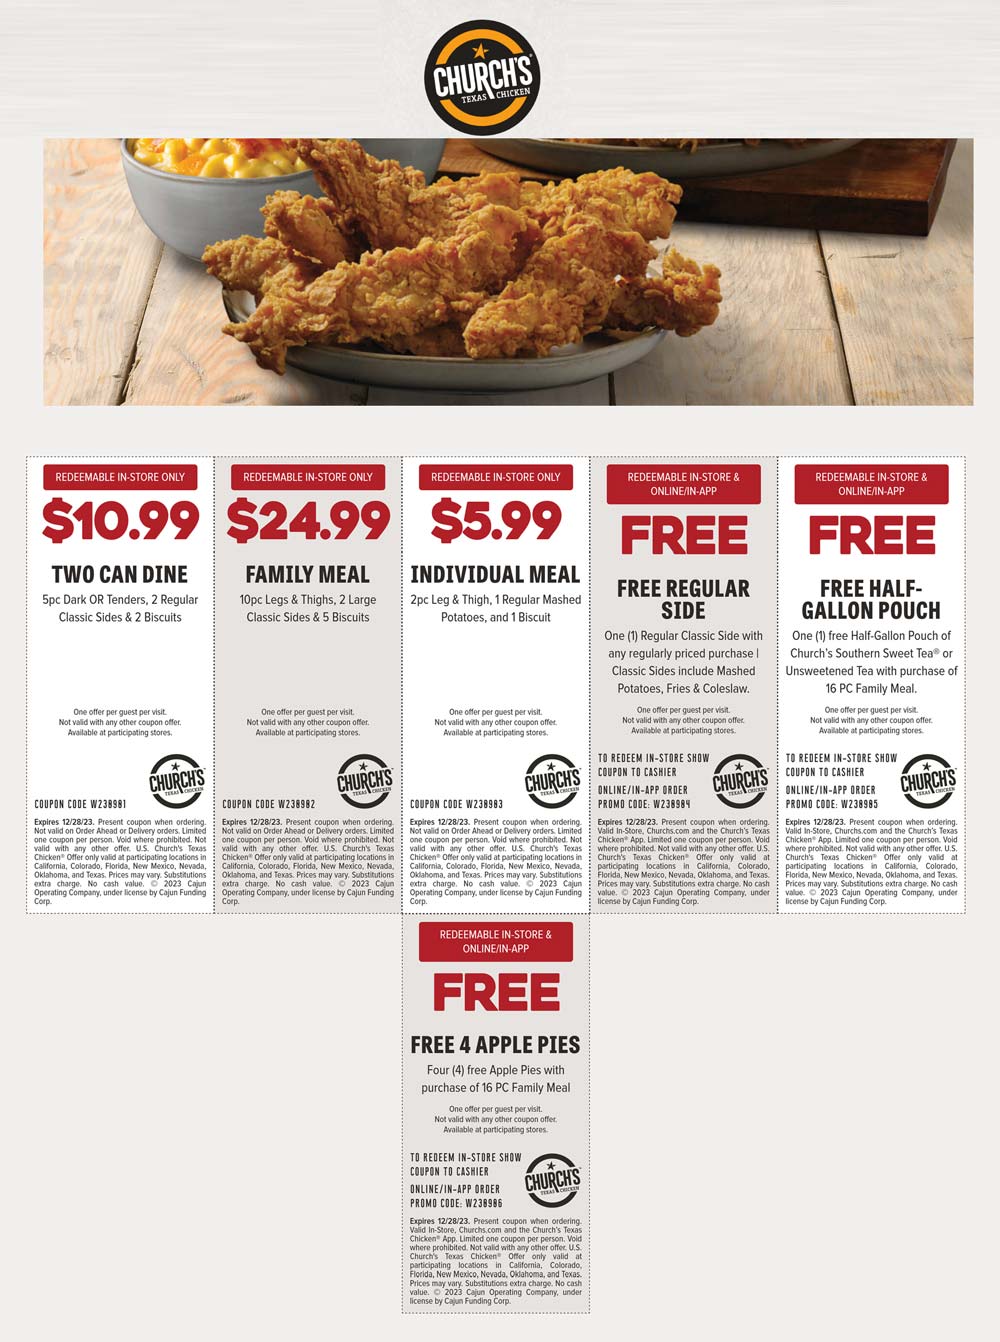 Churchs Texas Chicken restaurants Coupon  4 free apple pies with your family meal & more at Churchs Texas Chicken #churchstexaschicken 